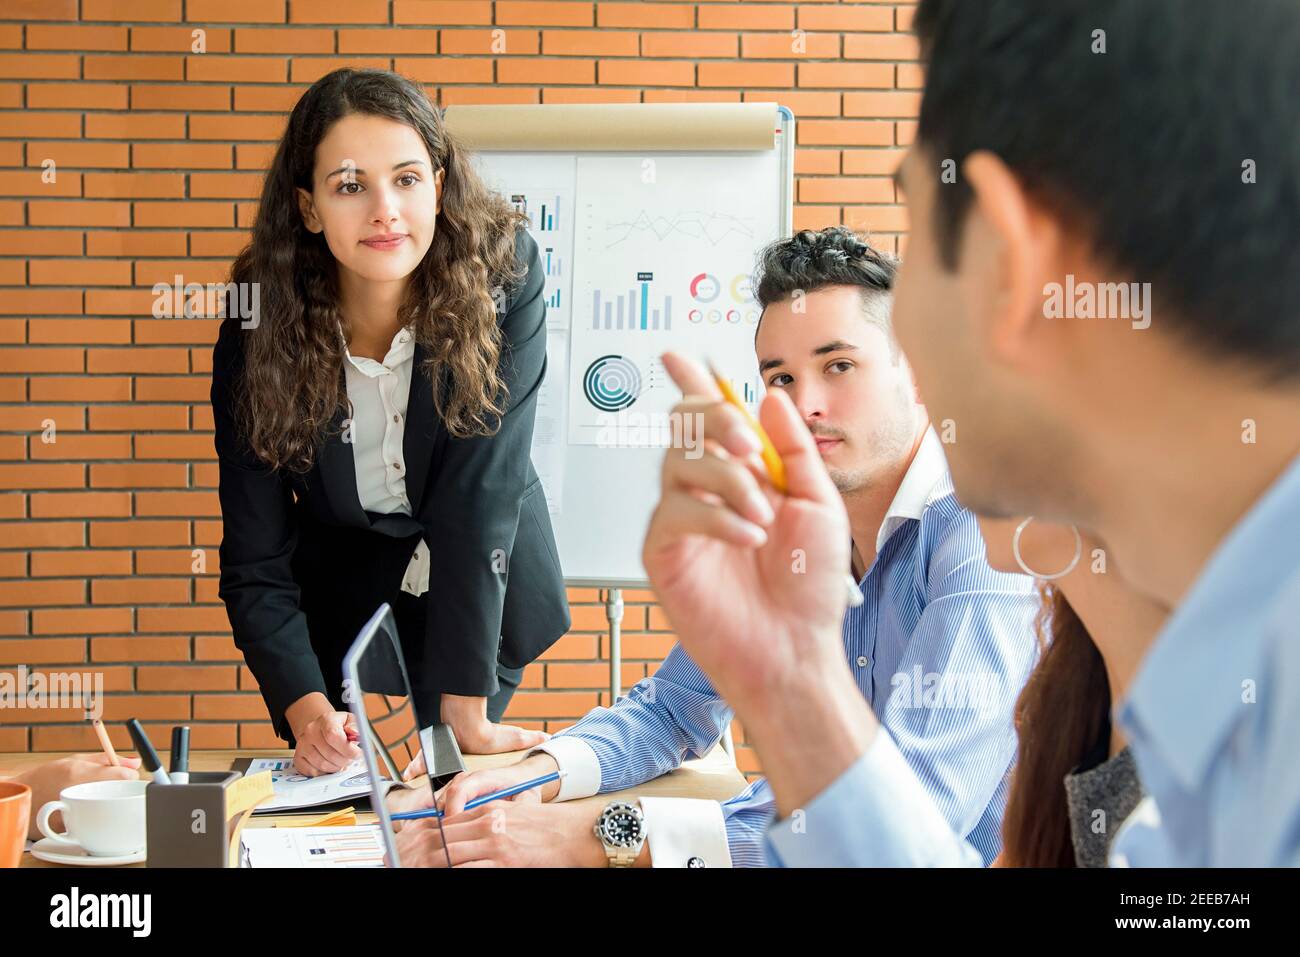 Businesswoman leader listening to her colleague in the meeting Stock Photo